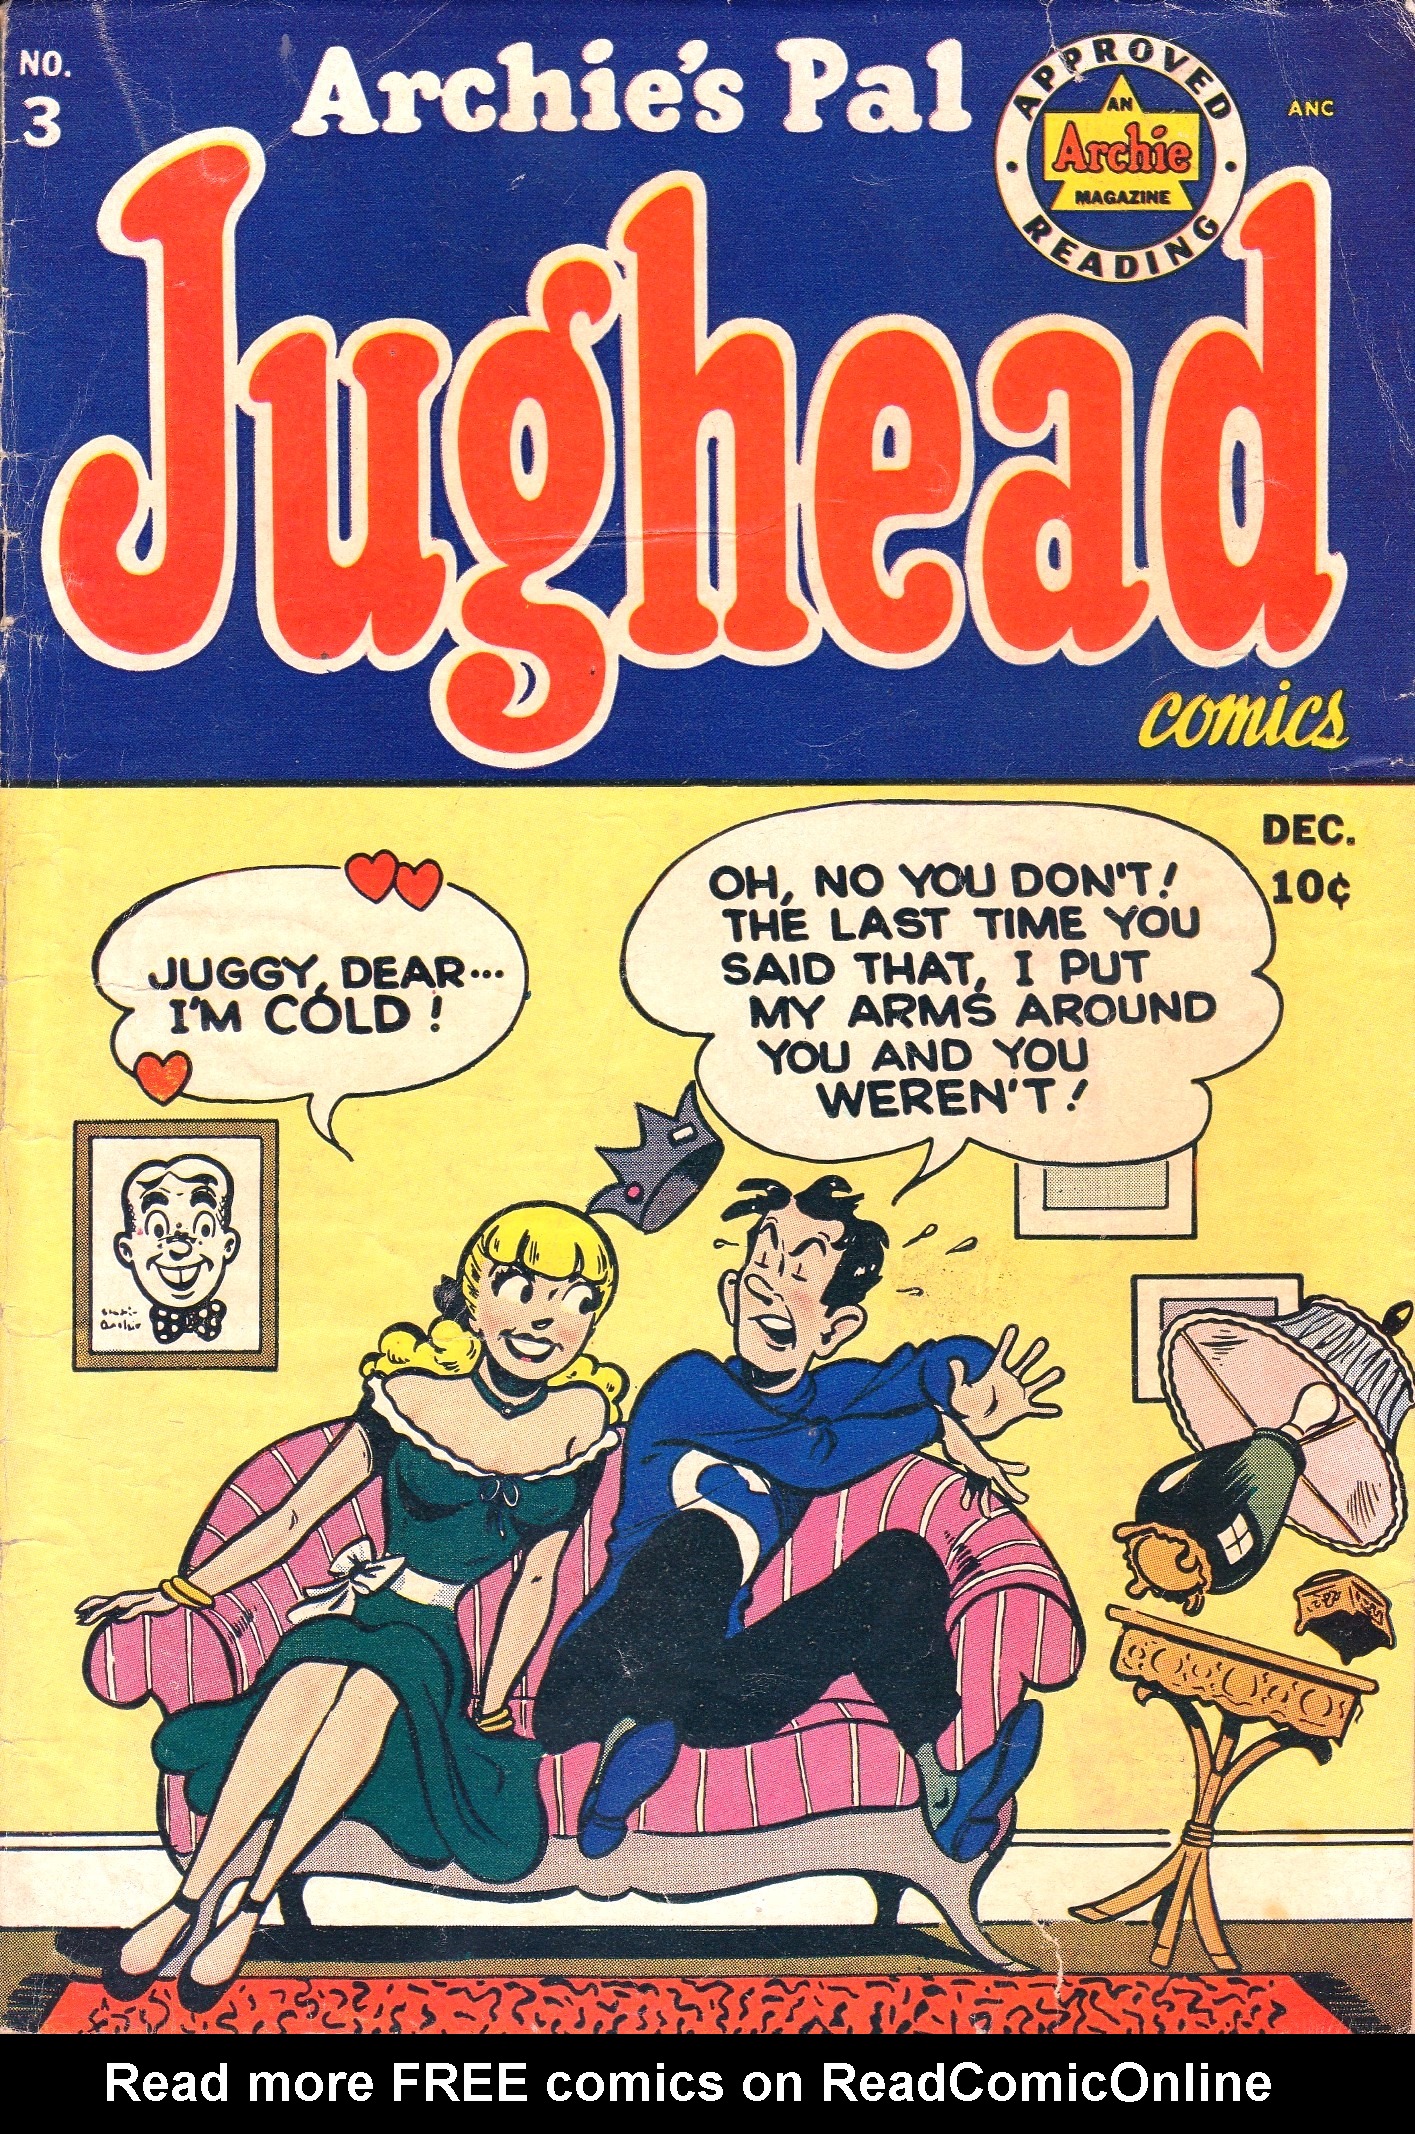 Read online Archie's Pal Jughead comic -  Issue #3 - 1